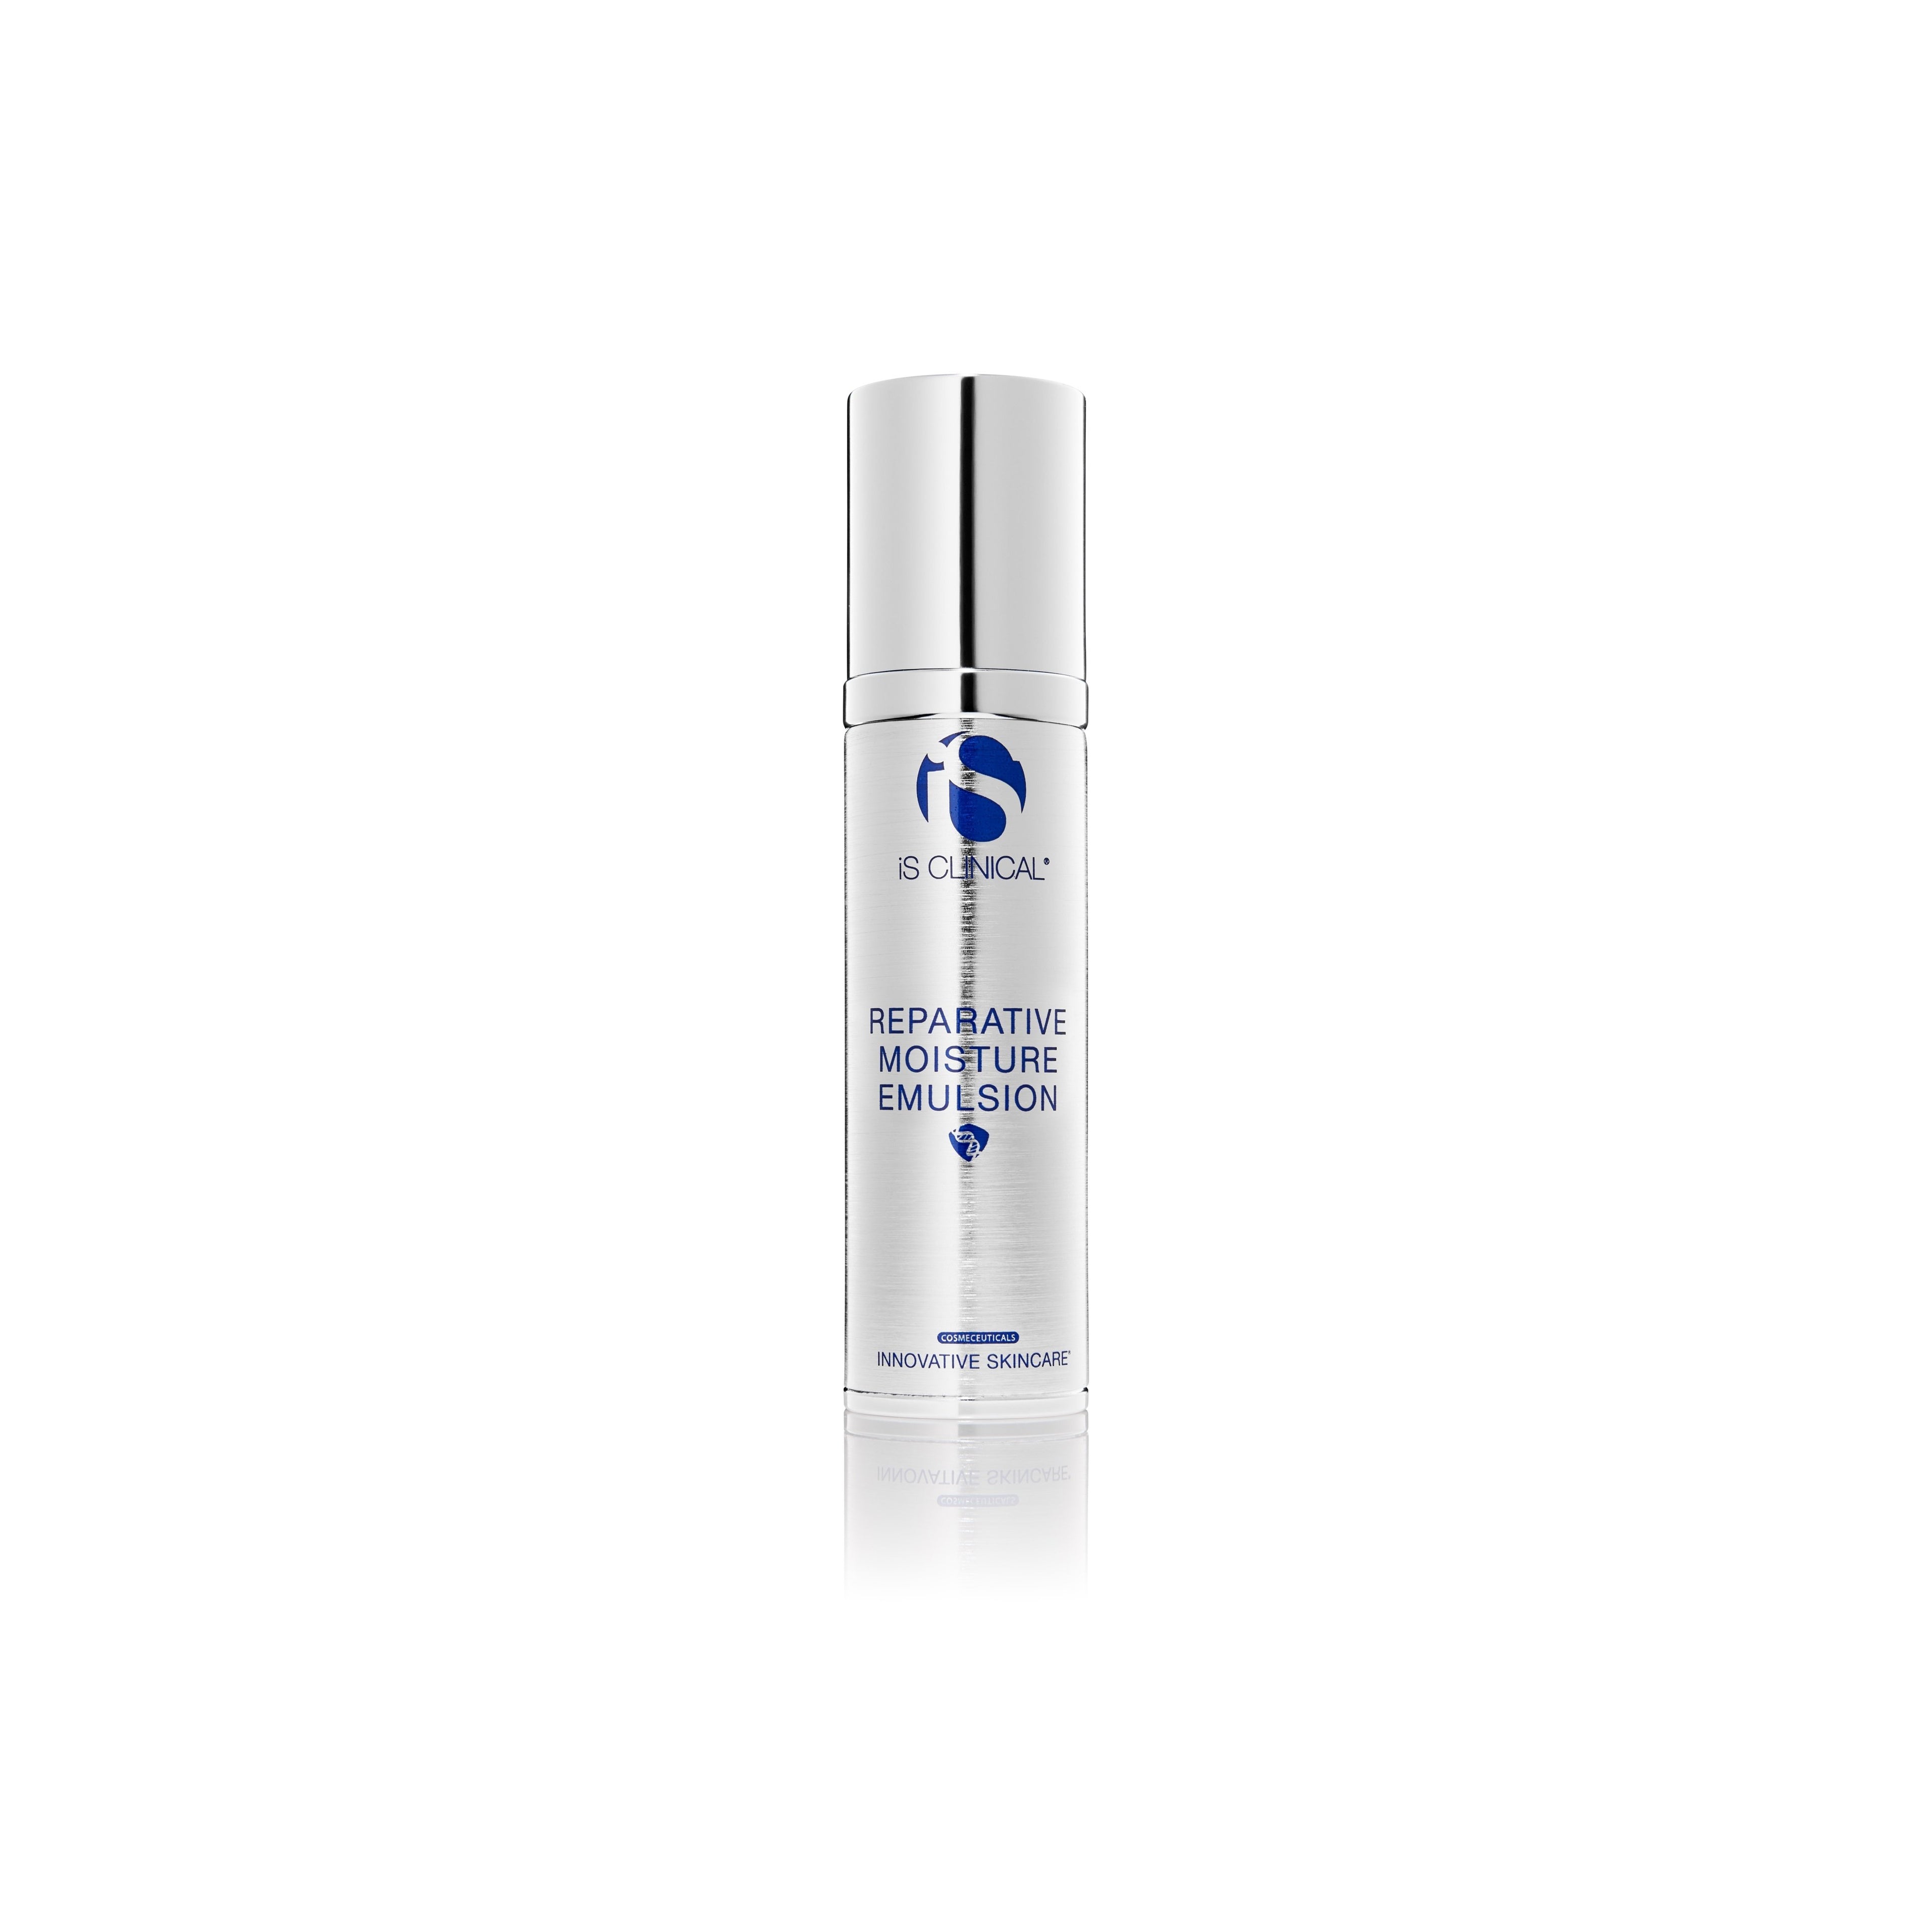 IS Clinical Reparative Moisture Emulsion 50 ml